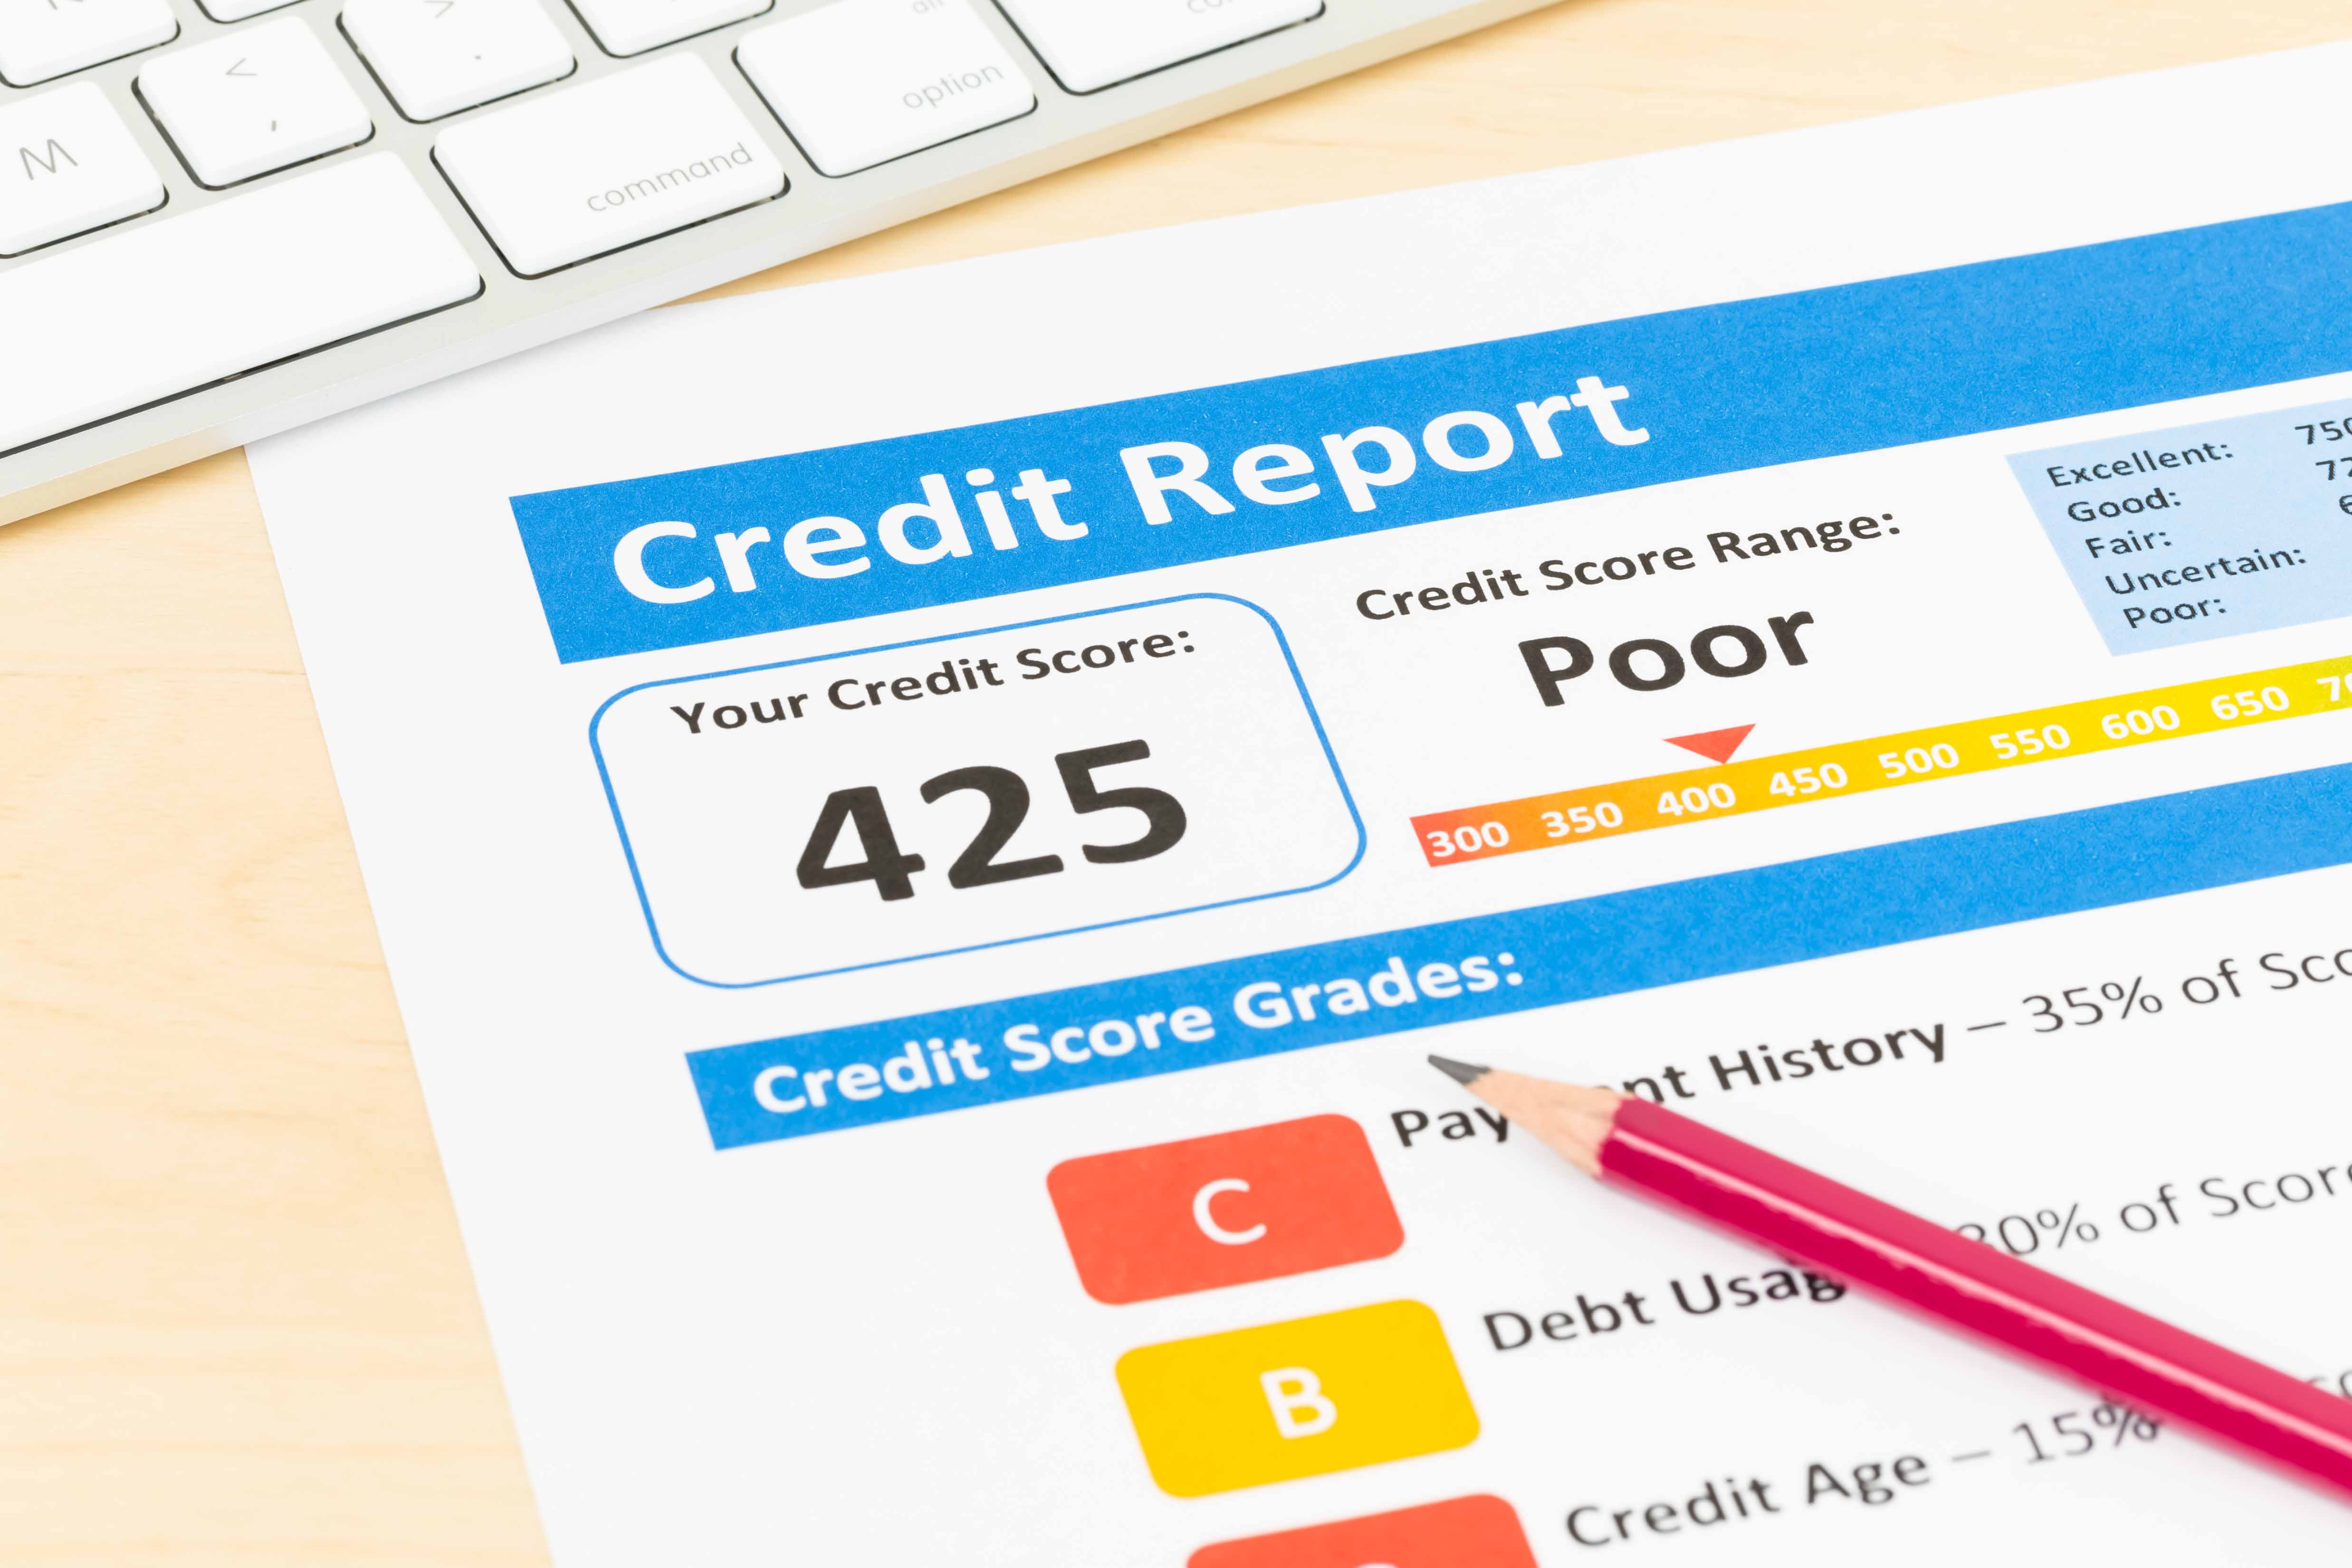 Having a less than perfect credit score blog article